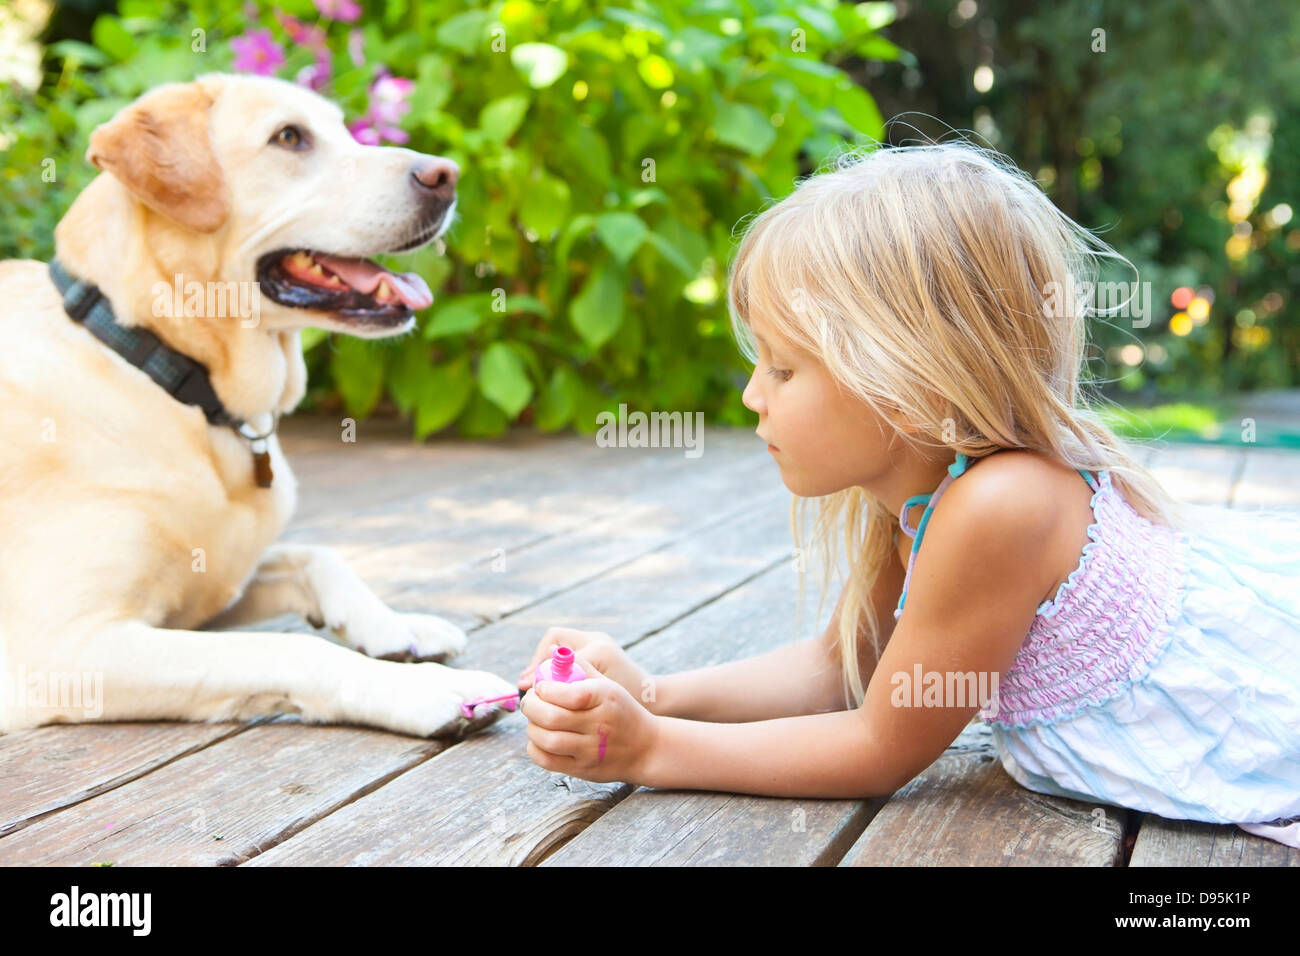 Little girl painting the claws of a dog with bright pink nail polish on a sunny summer afternoon in Portland, Oregon, USA Stock Photo